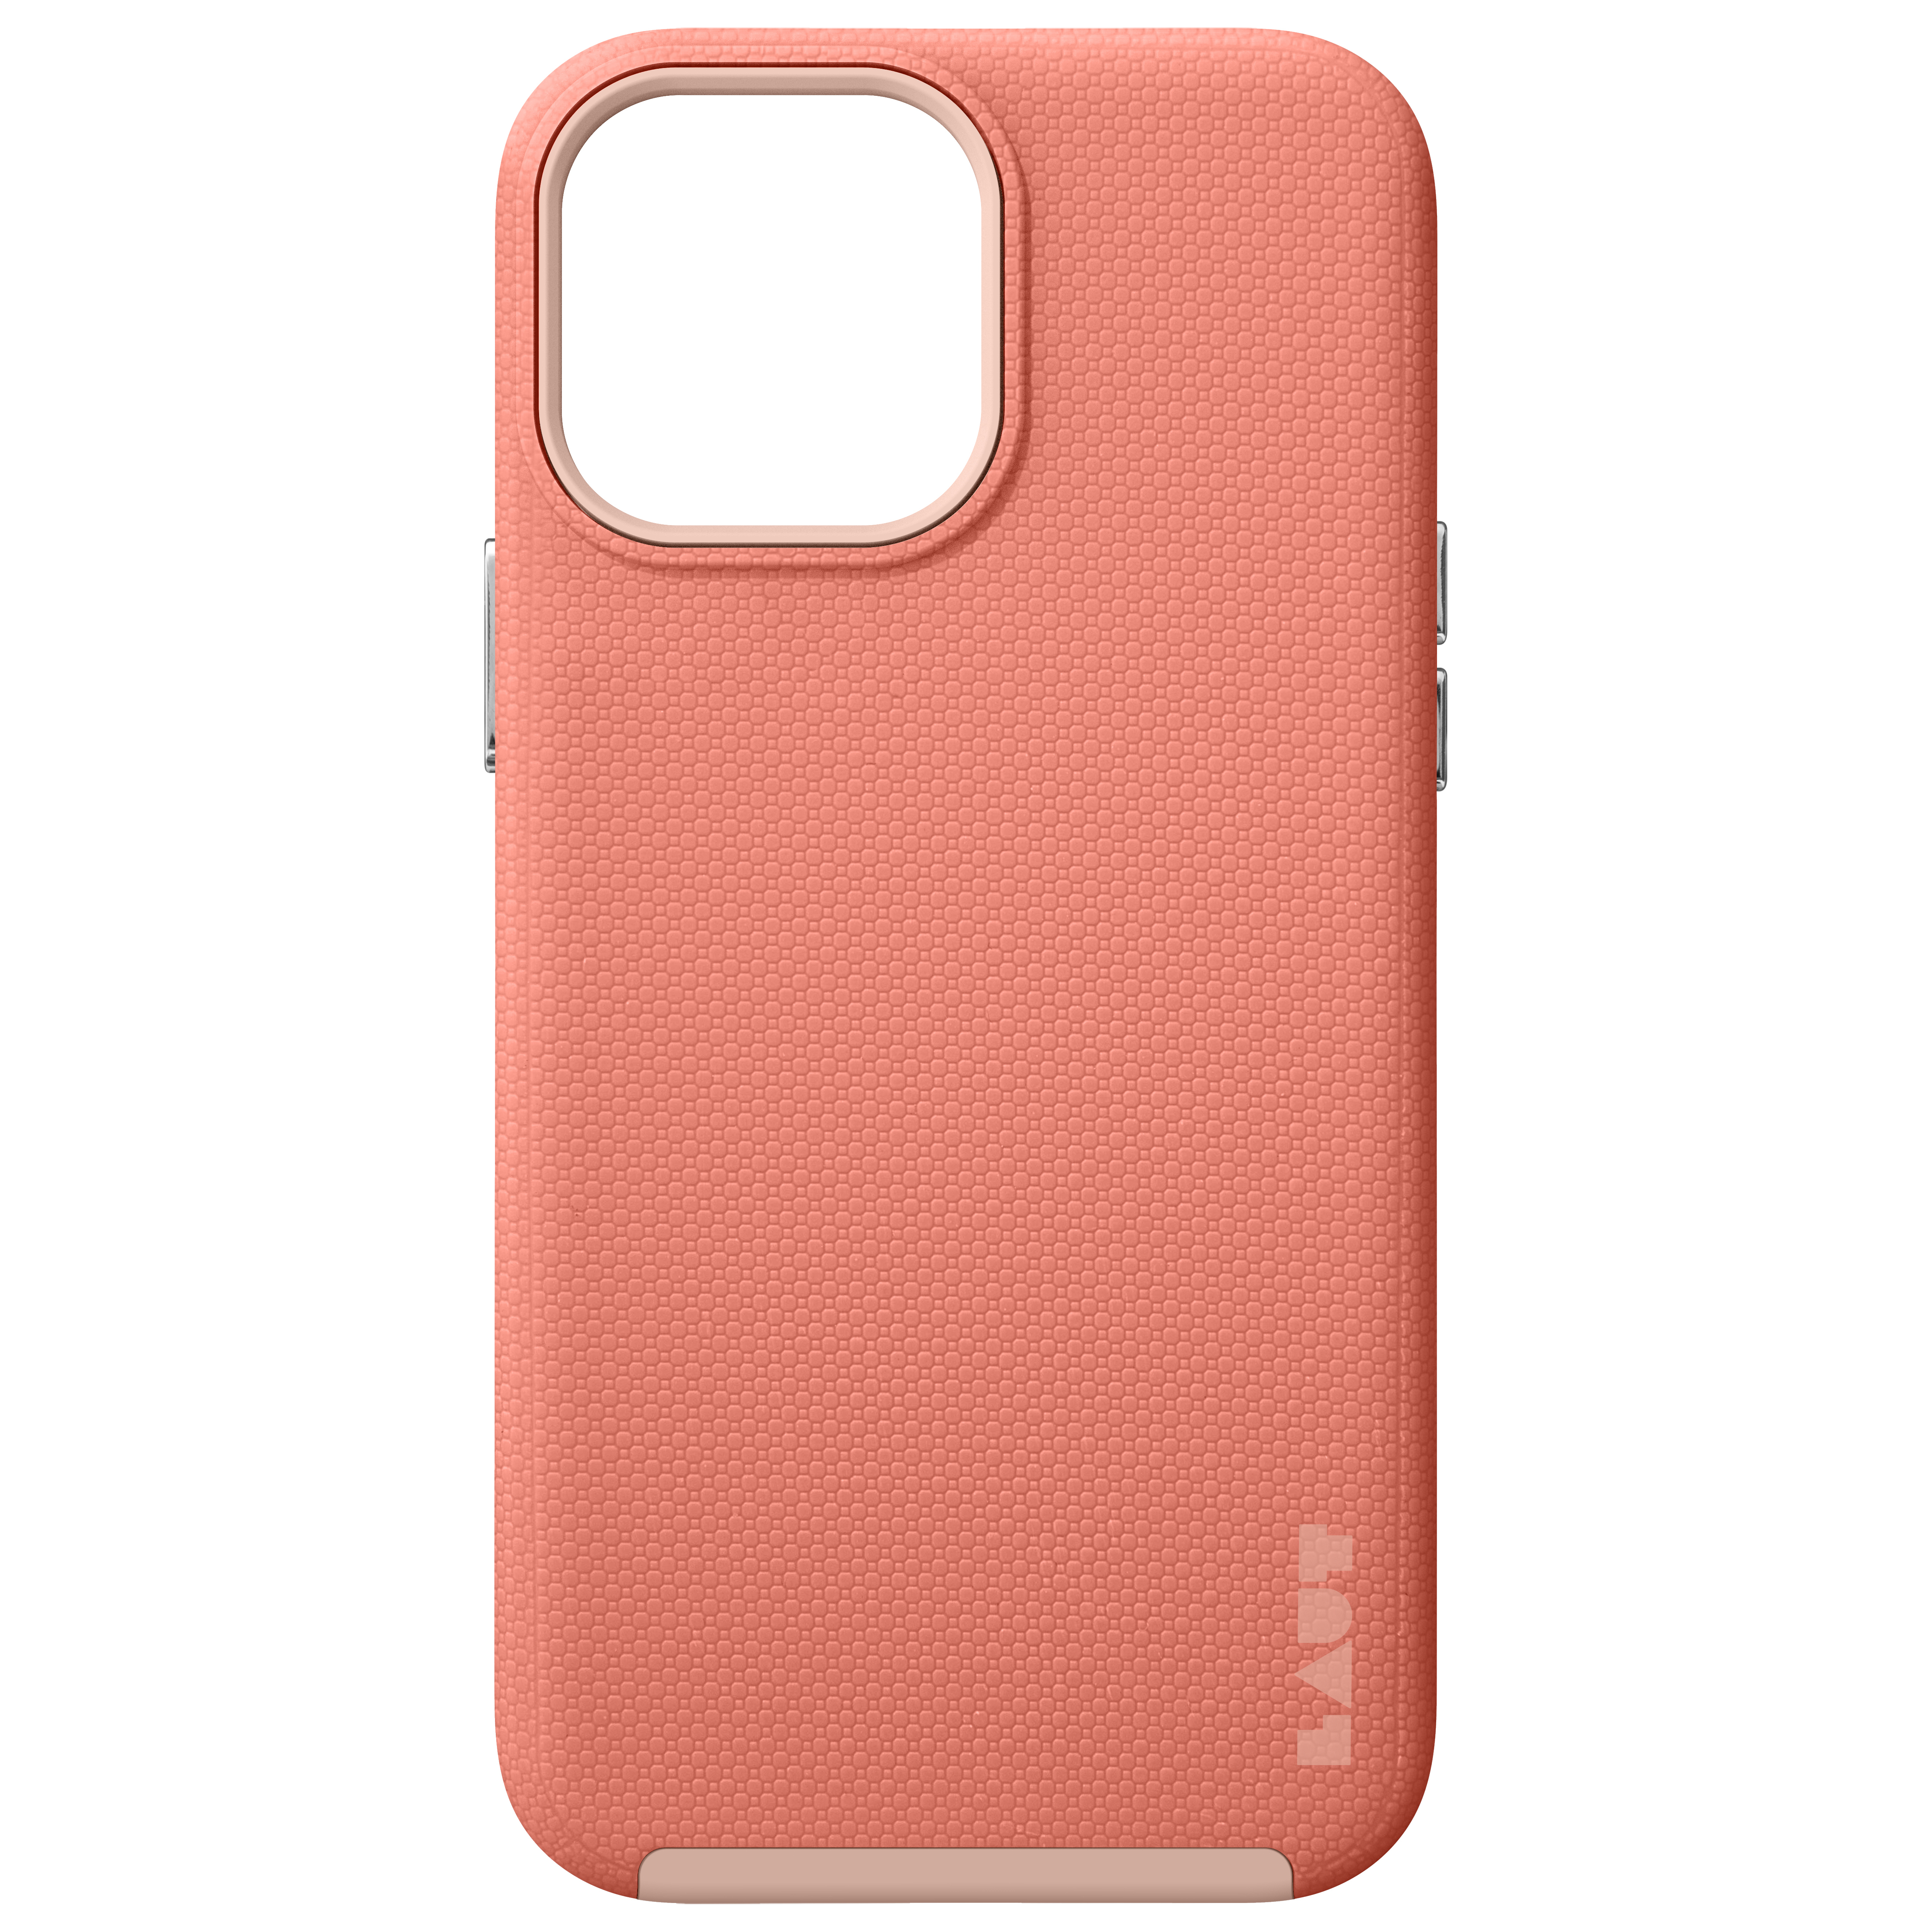 LAUT Shield, 13 Backcover, PINK IPHONE APPLE, PRO